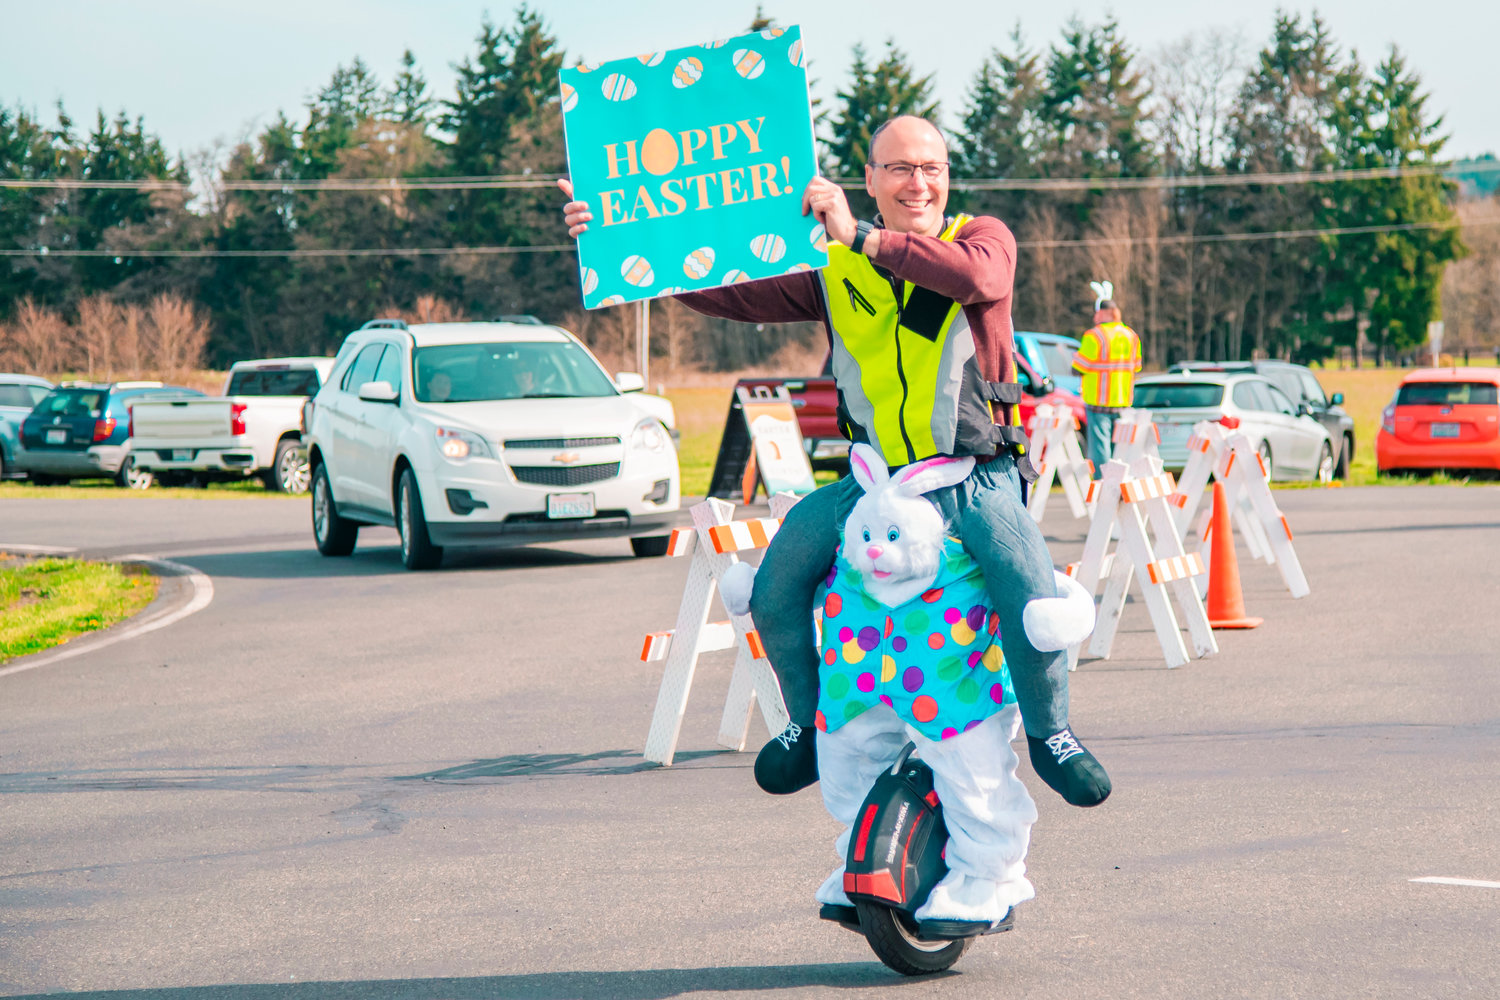 Kyle Rasmussen smiles while riding a one-wheel and holding a sign during an Easter event at Bethel Church in Chehalis on Saturday.